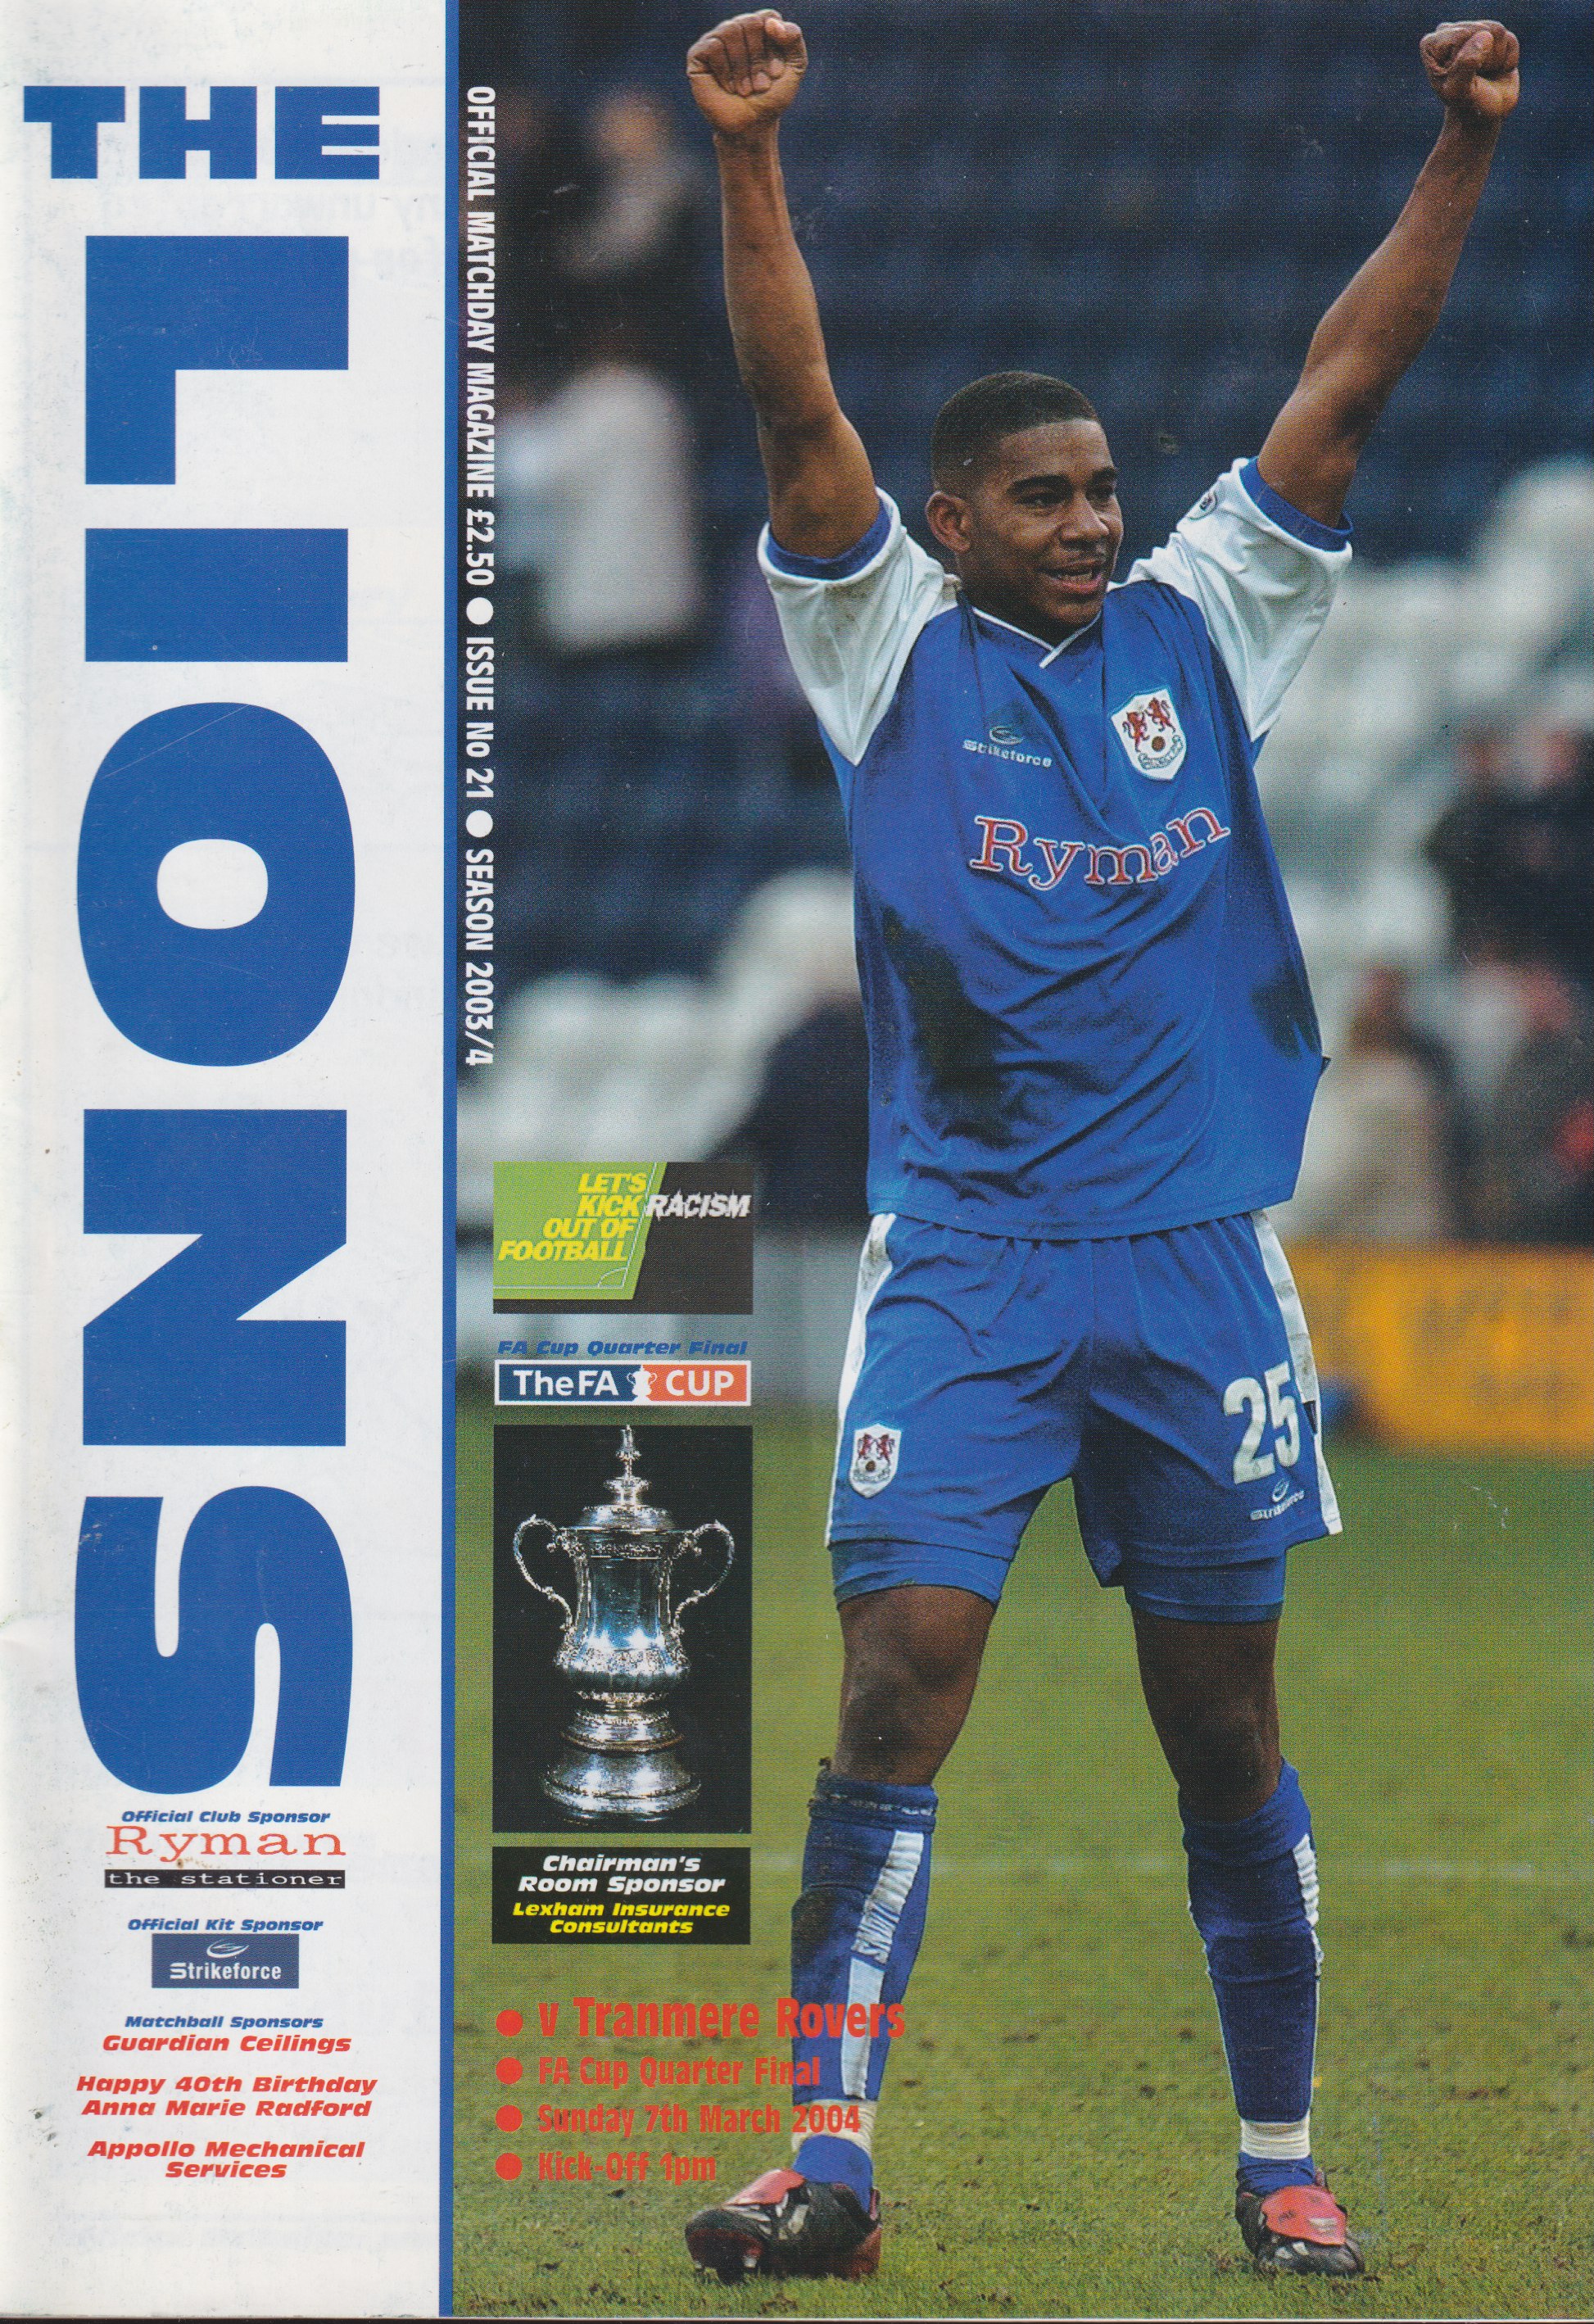 Match Programme For {home}} 0-0 Tranmere Rovers, FA Cup, 2004-03-07